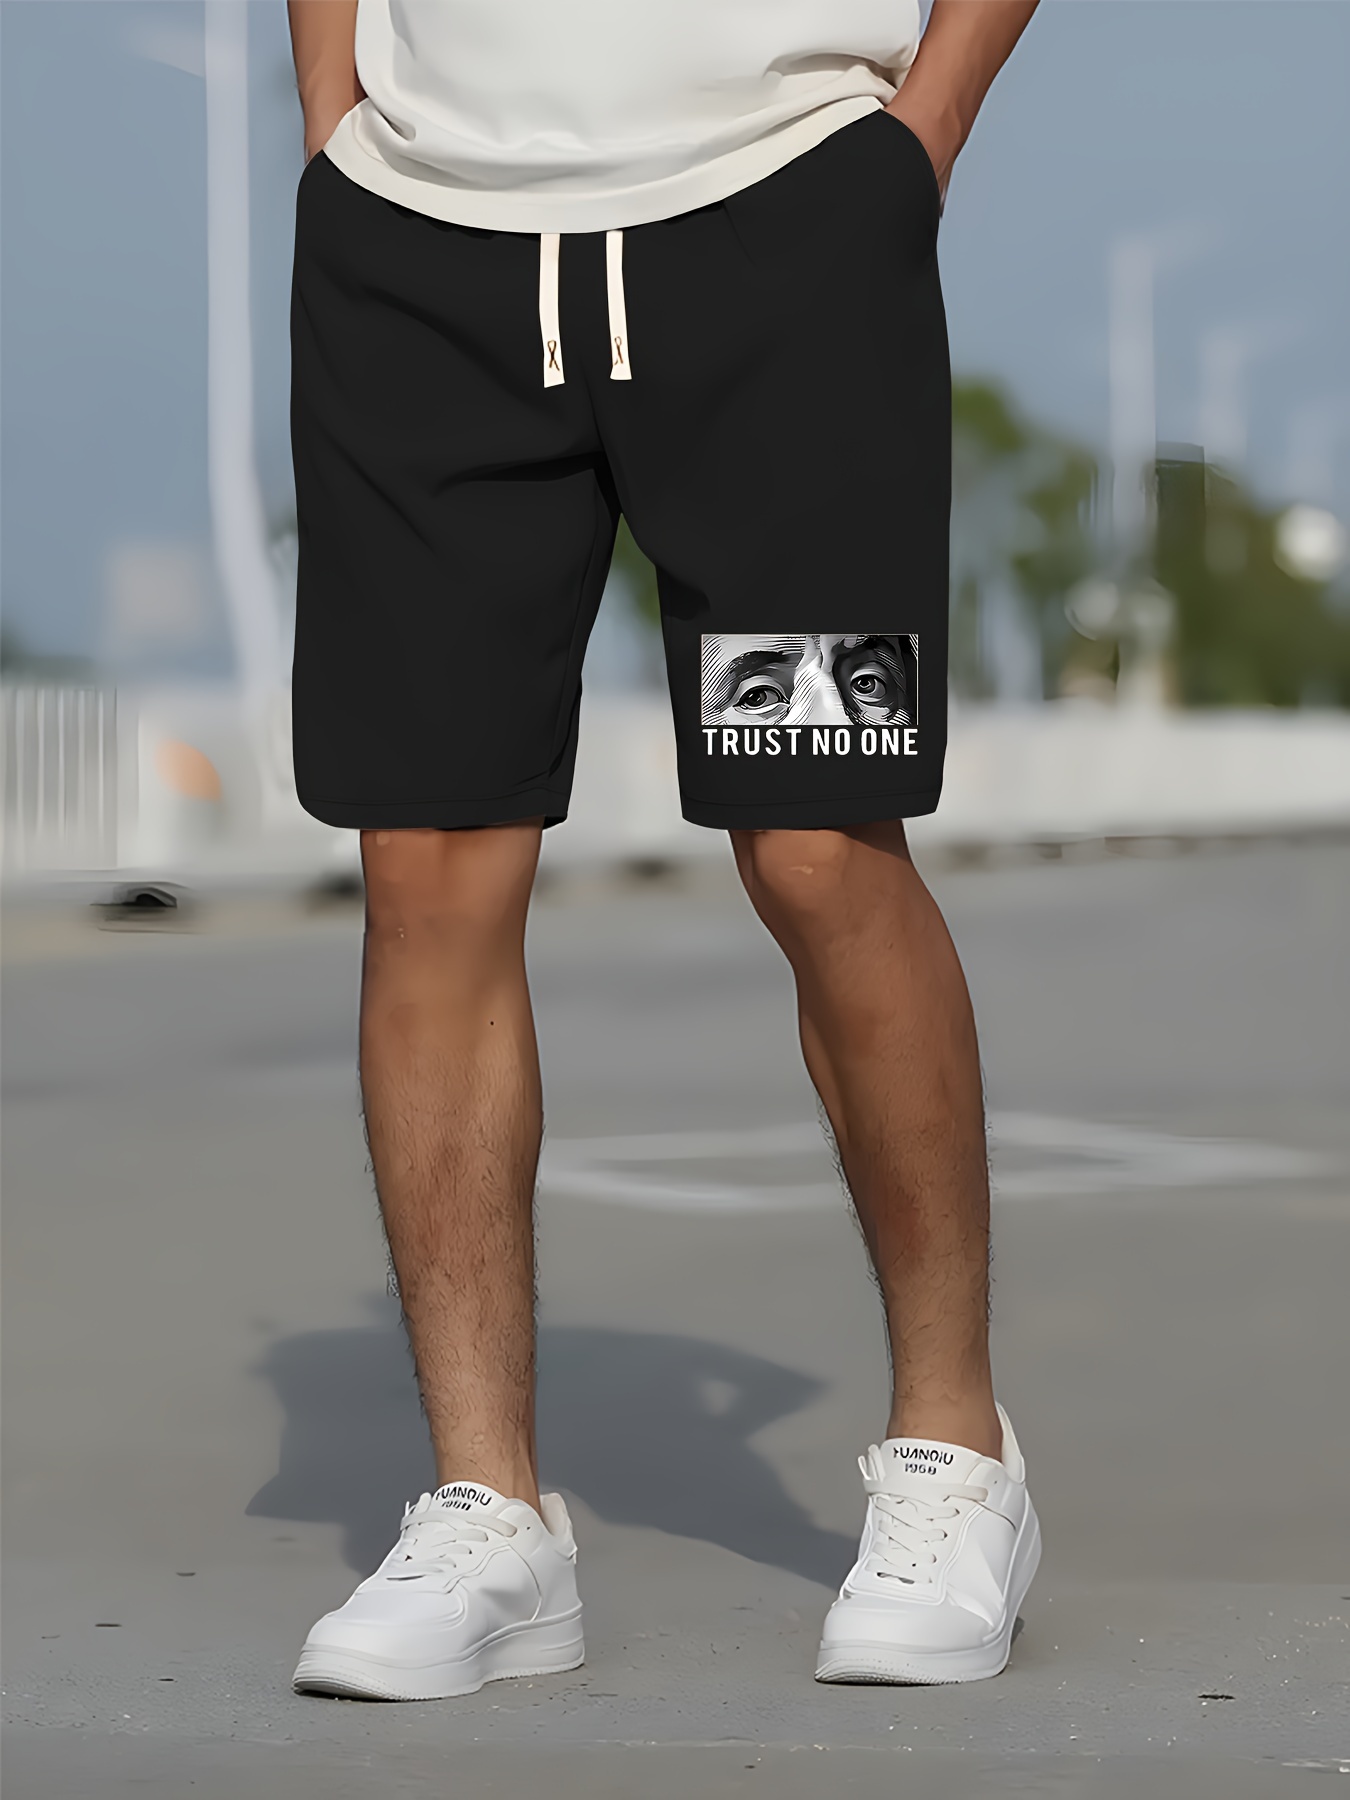 Bear Pattern Letter Print Striped Quick Drying Comfy Shorts, Men's Casual  Waist Drawstring Shorts For Summer Fitness Beach Resort